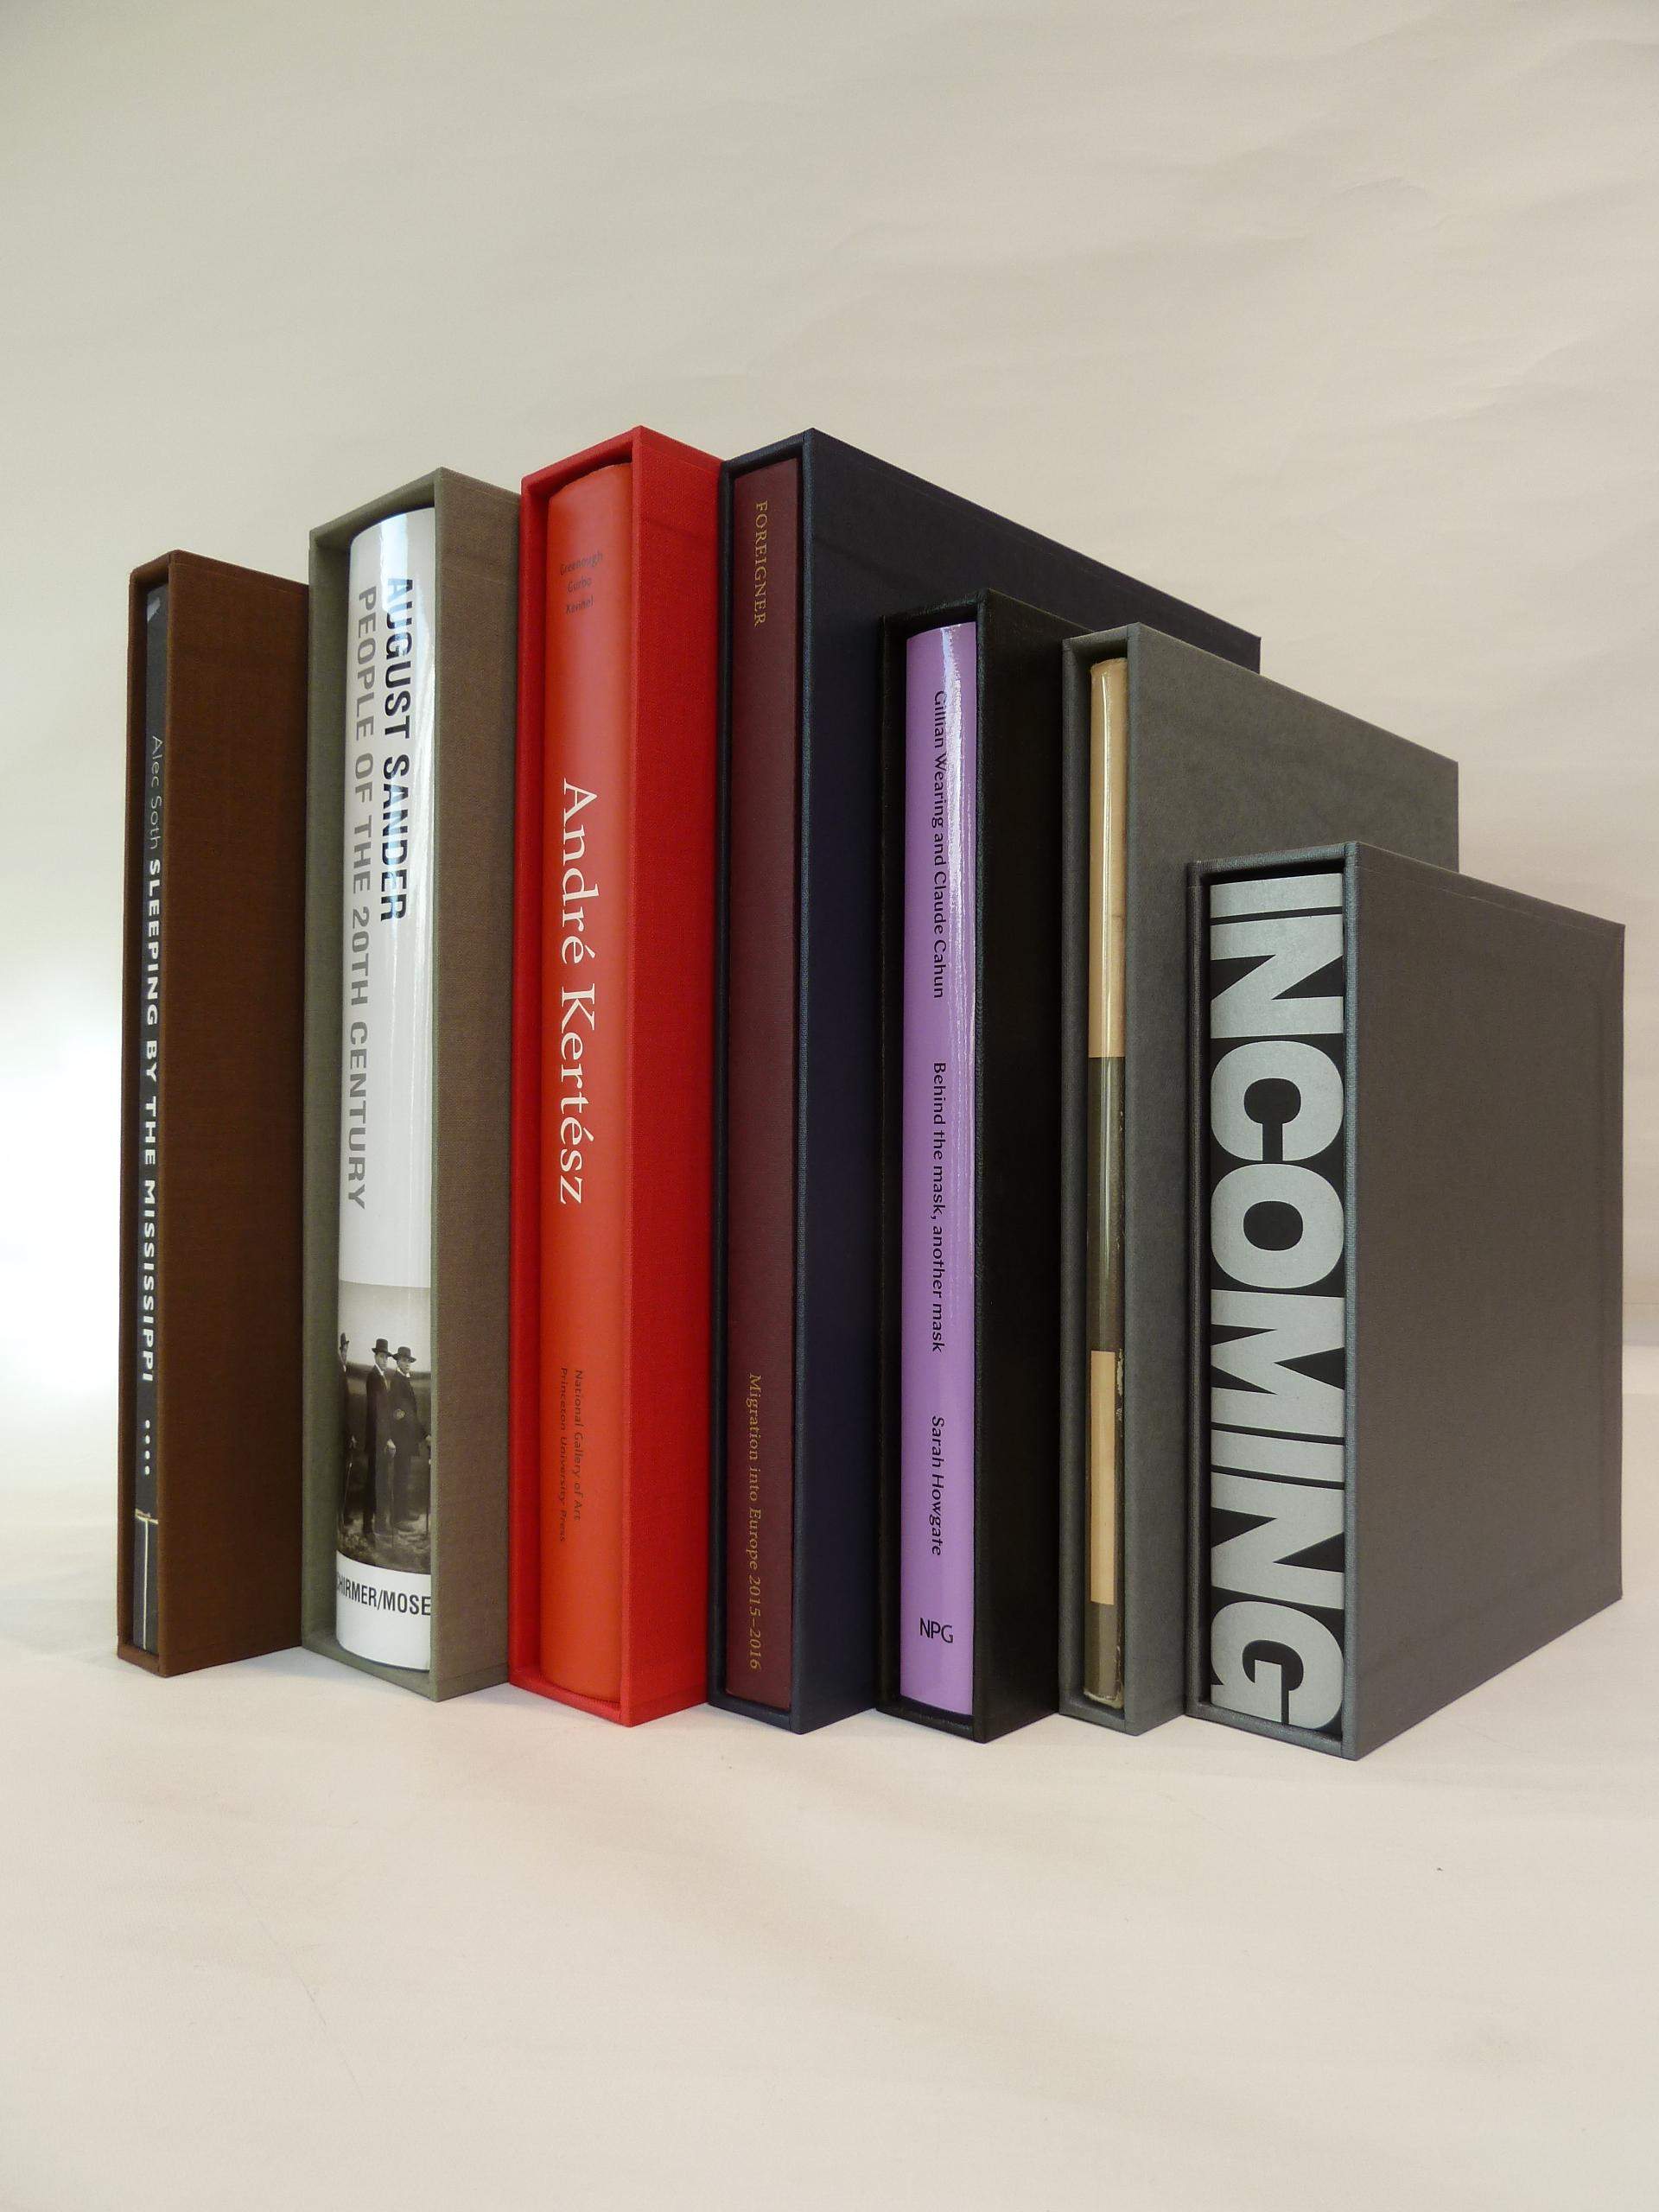 Bespoke to protect collection of photographic books